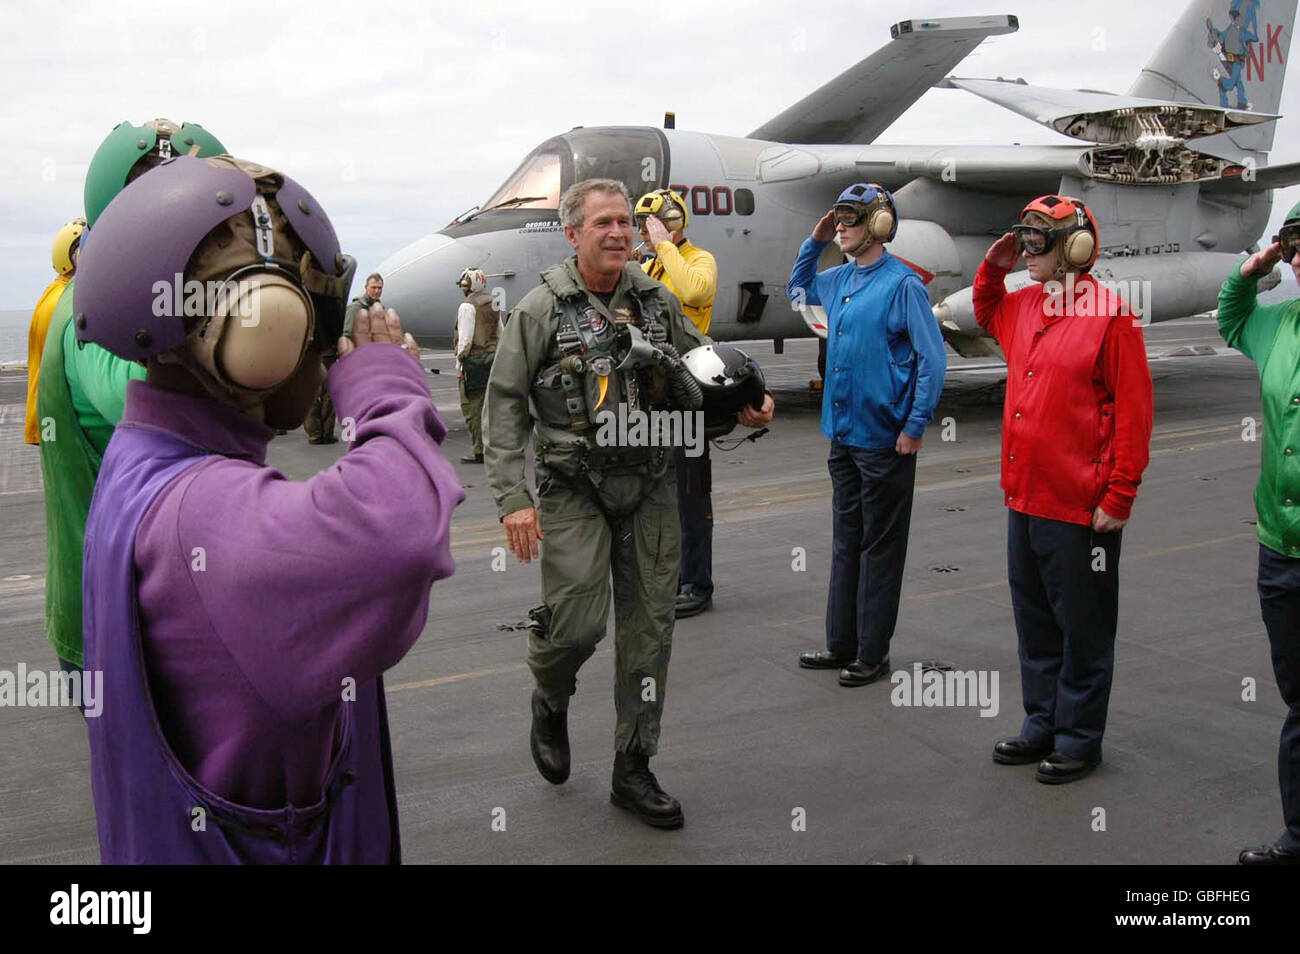 U.S. President George W. Bush passes through the 'side boys' after a successful on the flight deck in a S-3B Viking aircraft on the aircraft carrier USS Abraham Lincoln during a visit May 1, 2003 in the Pacific Ocean. The Lincoln in returning from a 10-month deployment to the Arabian Gulf in support of Operation Iraqi Freedom. Stock Photo